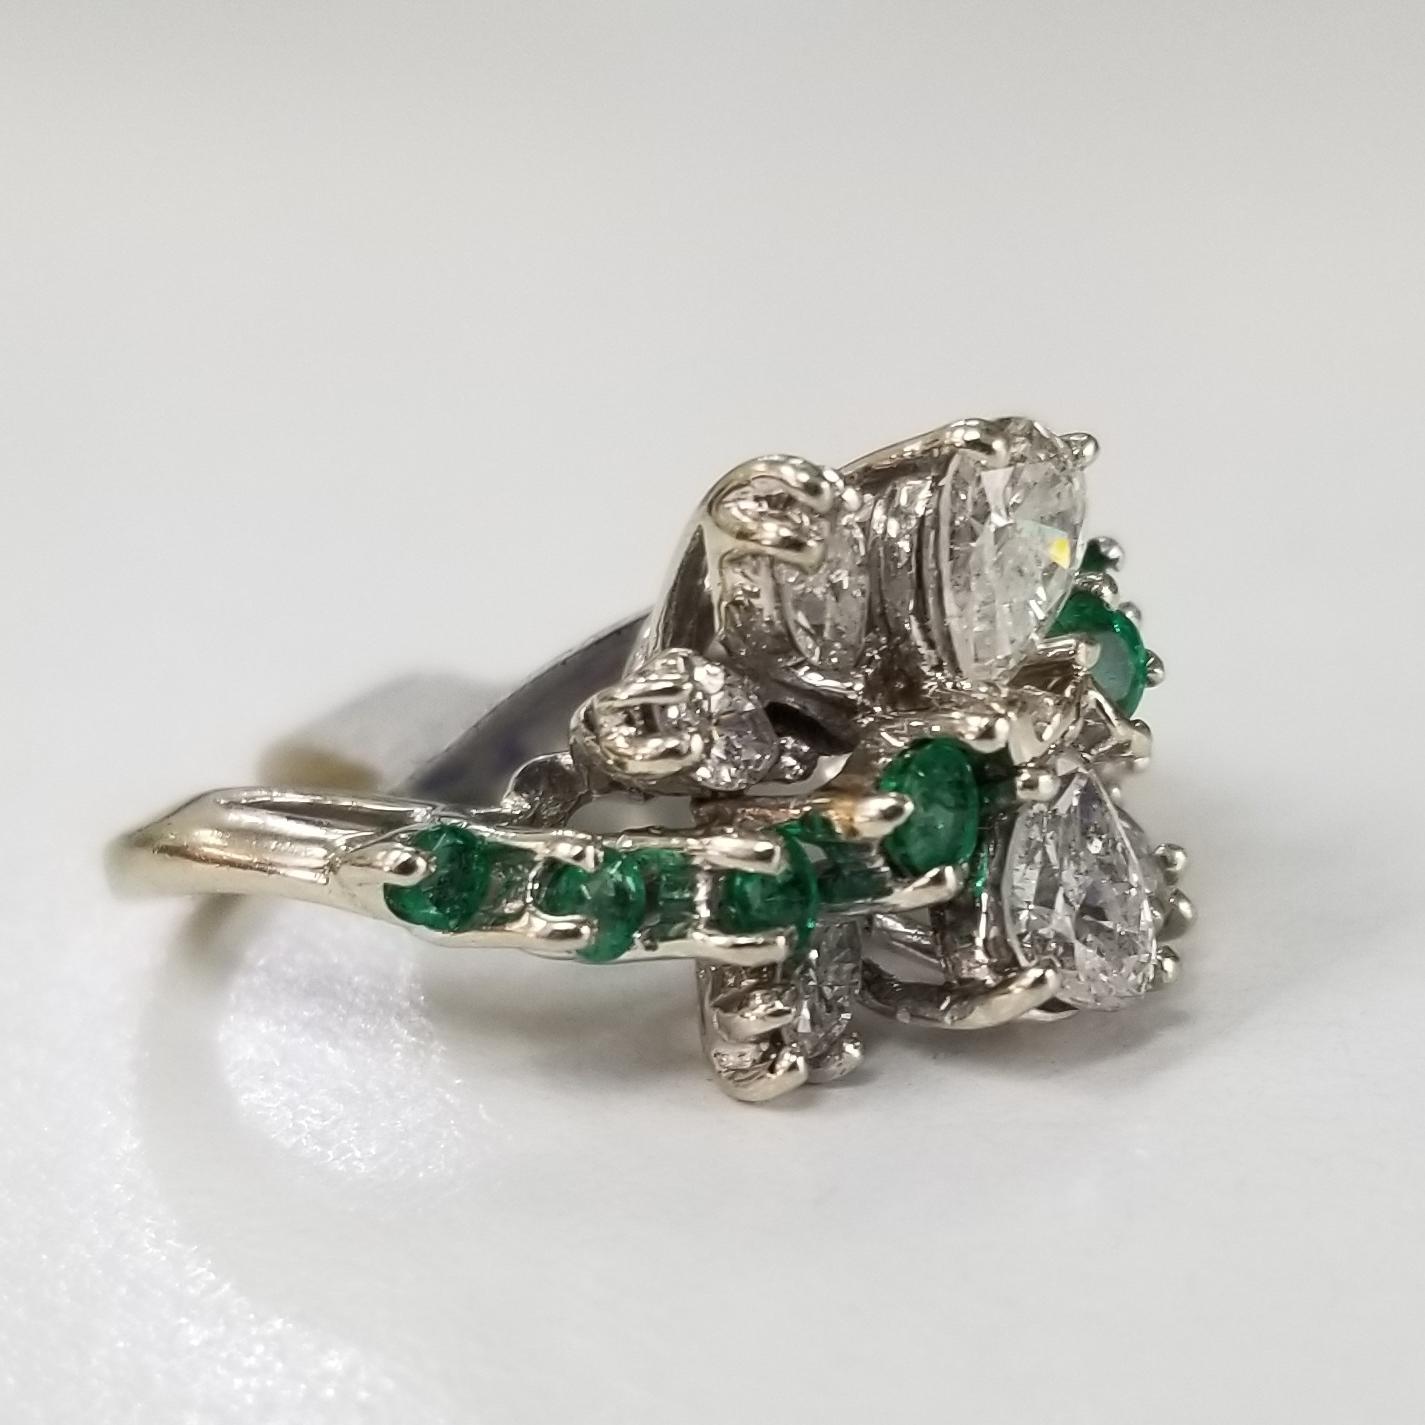 14 karat Diamond and Emerald cocktail ring, containing 2 pear shape cut, 4 marquise cut diamonds of very fine quality weighing2.08cts. and 8 round emeralds weighing .45pts.